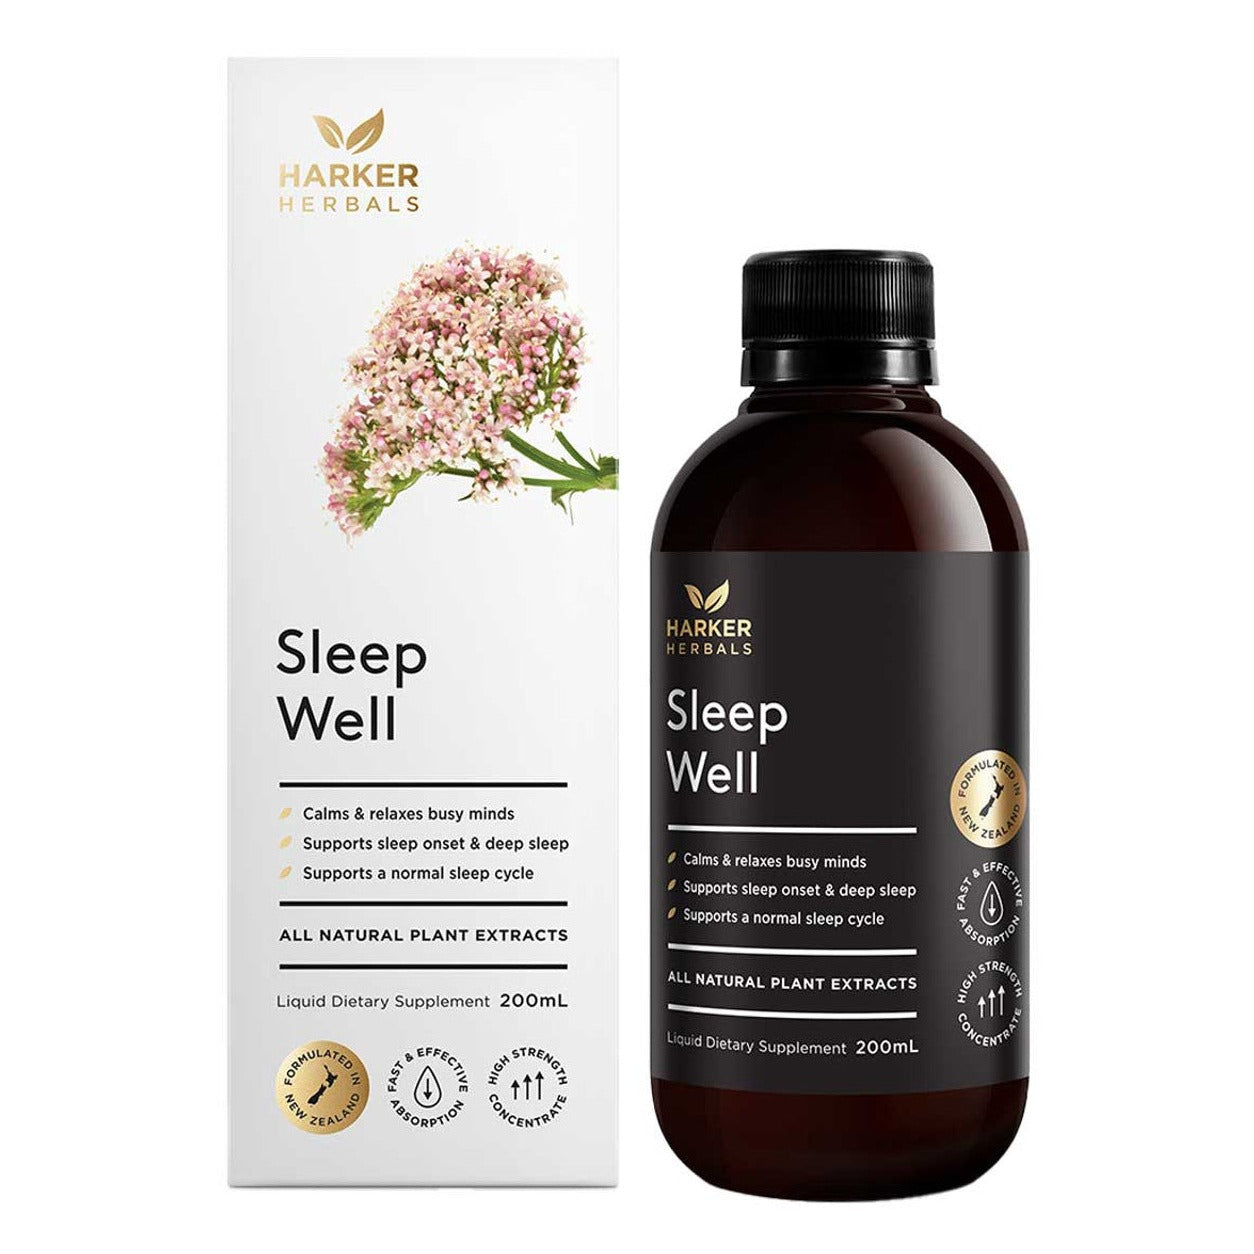 Harker Herbals Be Well Sleep Well 200ml Calms busy minds, supports deep sleep and healthy sleep habits. Great support for any sleep disruption; students, busy parents, menopausal women, shift workers.   HEALTH BENEFITS:  Supports the onset of sleep and calms the busy mind Supports uninterrupted, deep sleep and healthy sleep patterns Includes Passionflower, Valerian and Zizyphus, which clinical research shows support healthy sleep Natural lemon flavour